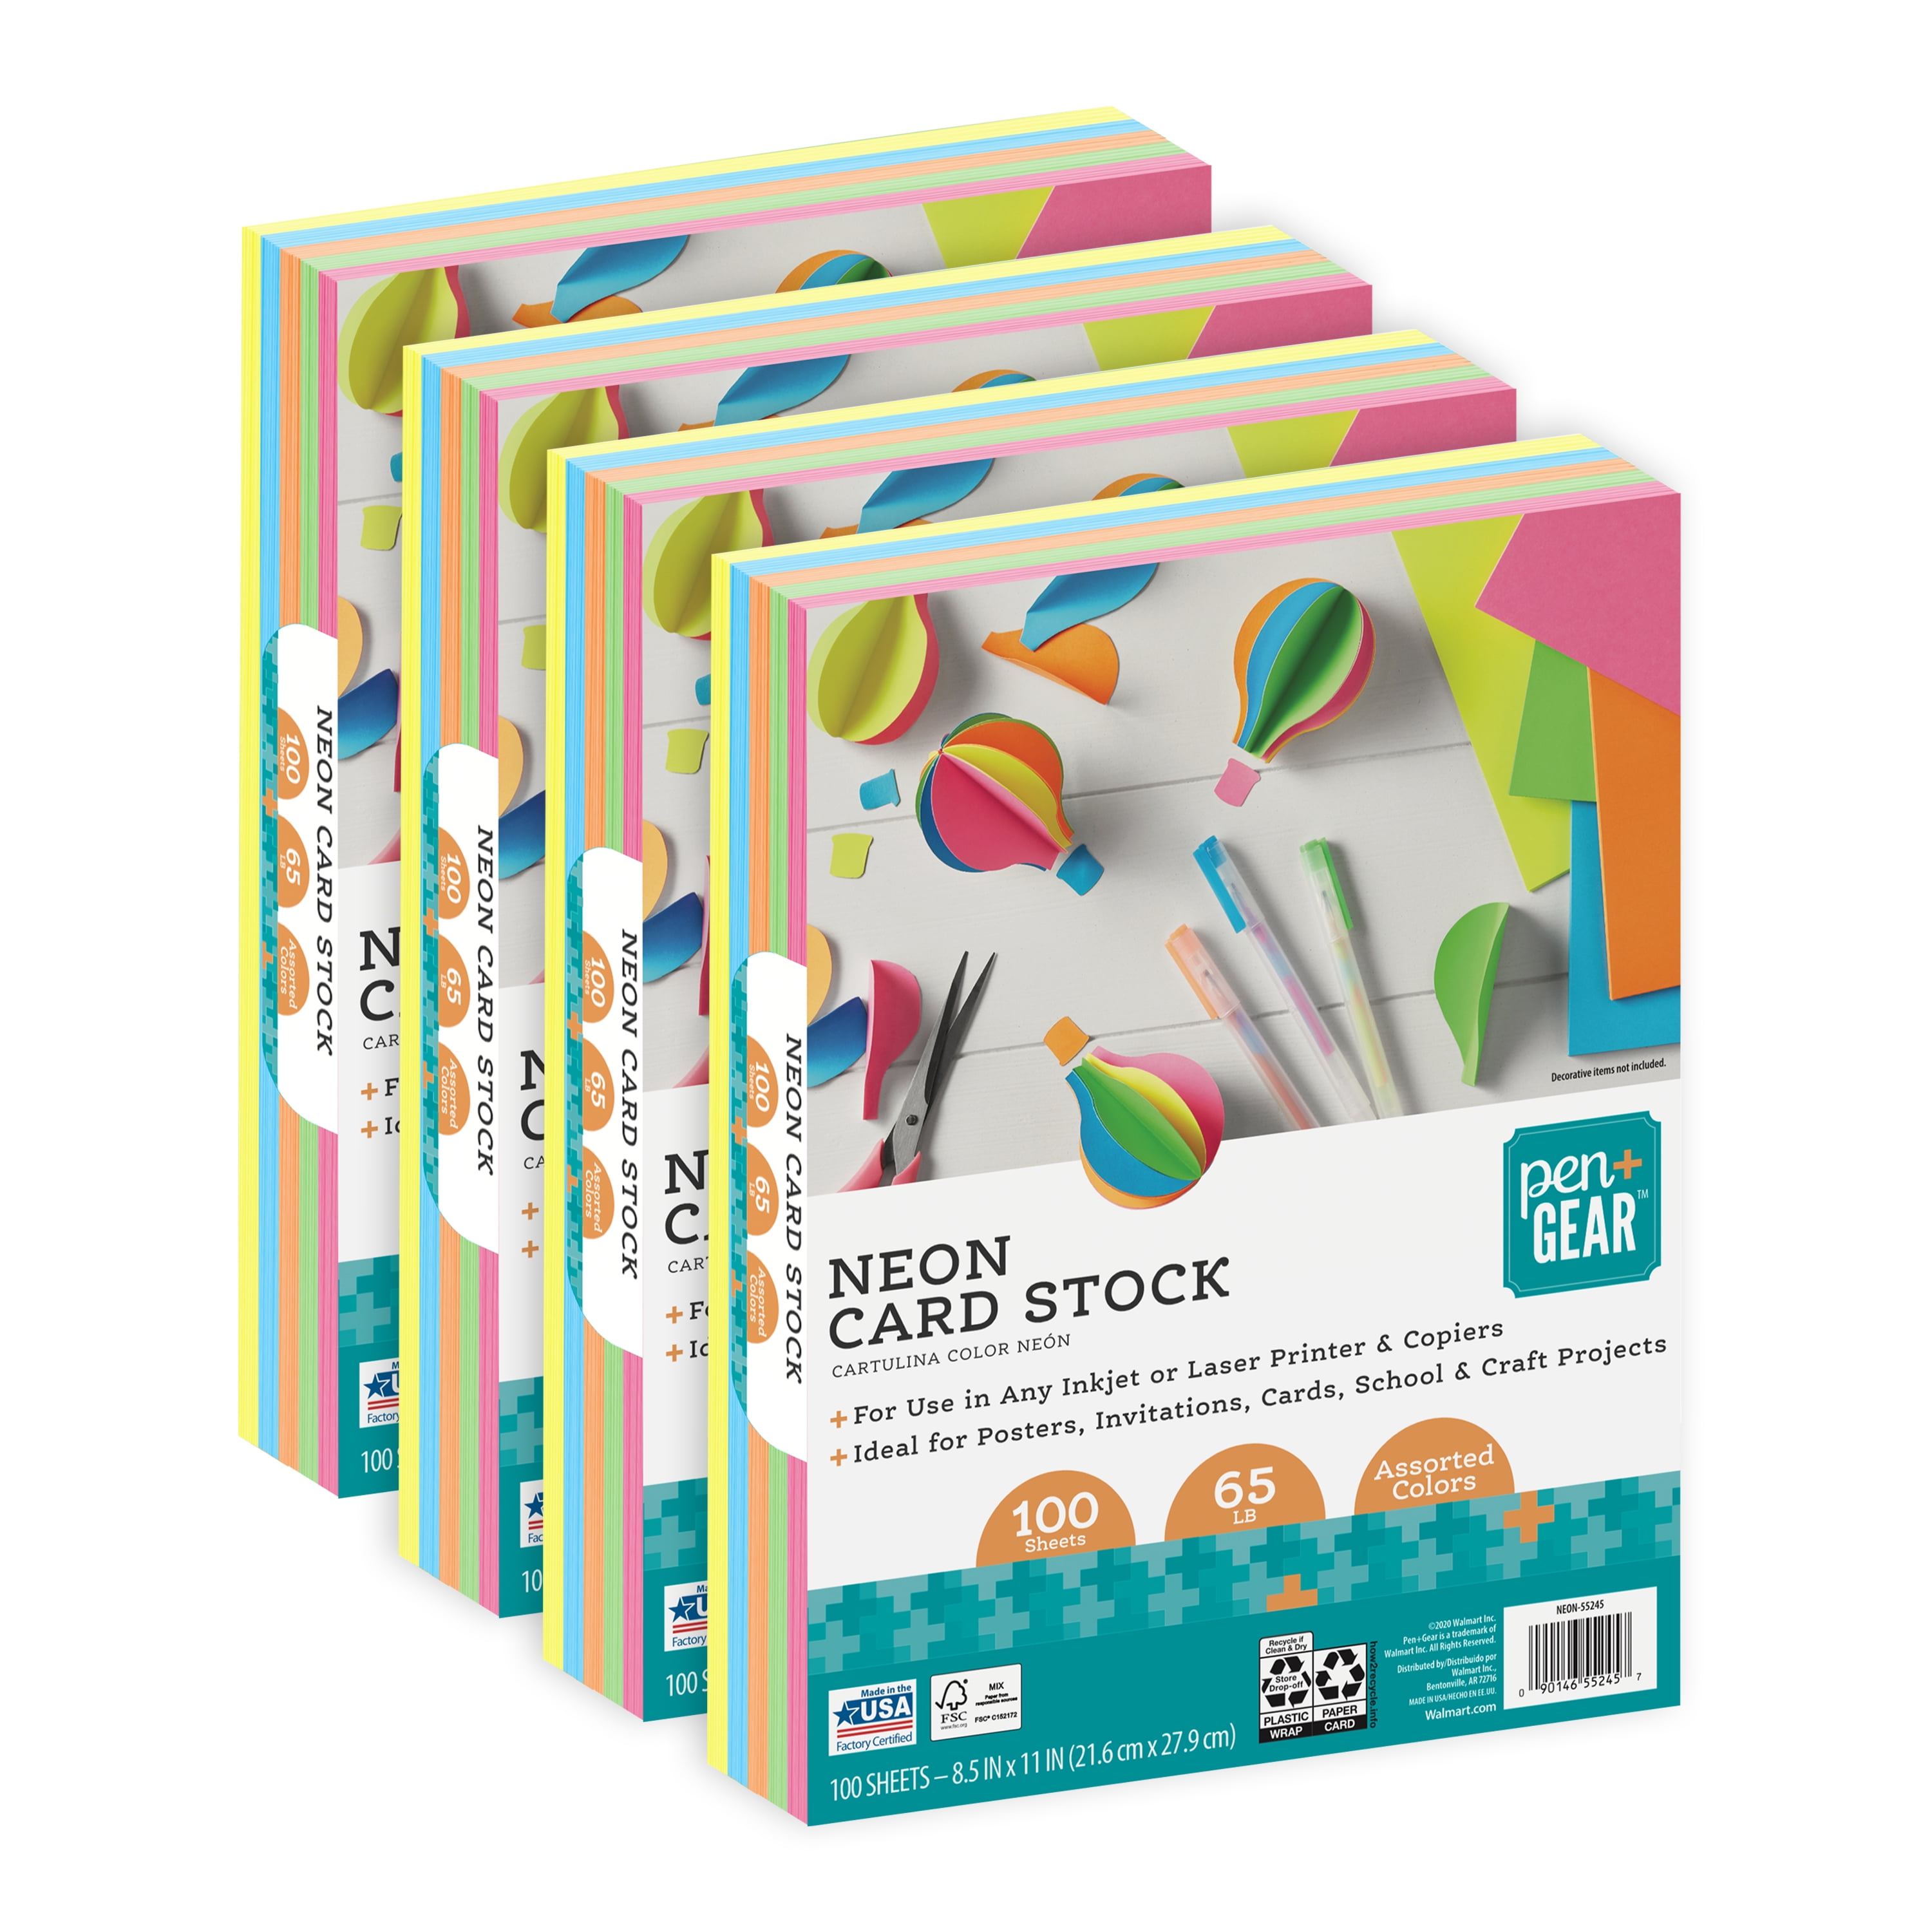 Pen + Gear Card Stock Paper, Assorted Neon, 8.5 x 11, 65 lb, 400 Sheets, Size: 4 Packs | 400 Sheets